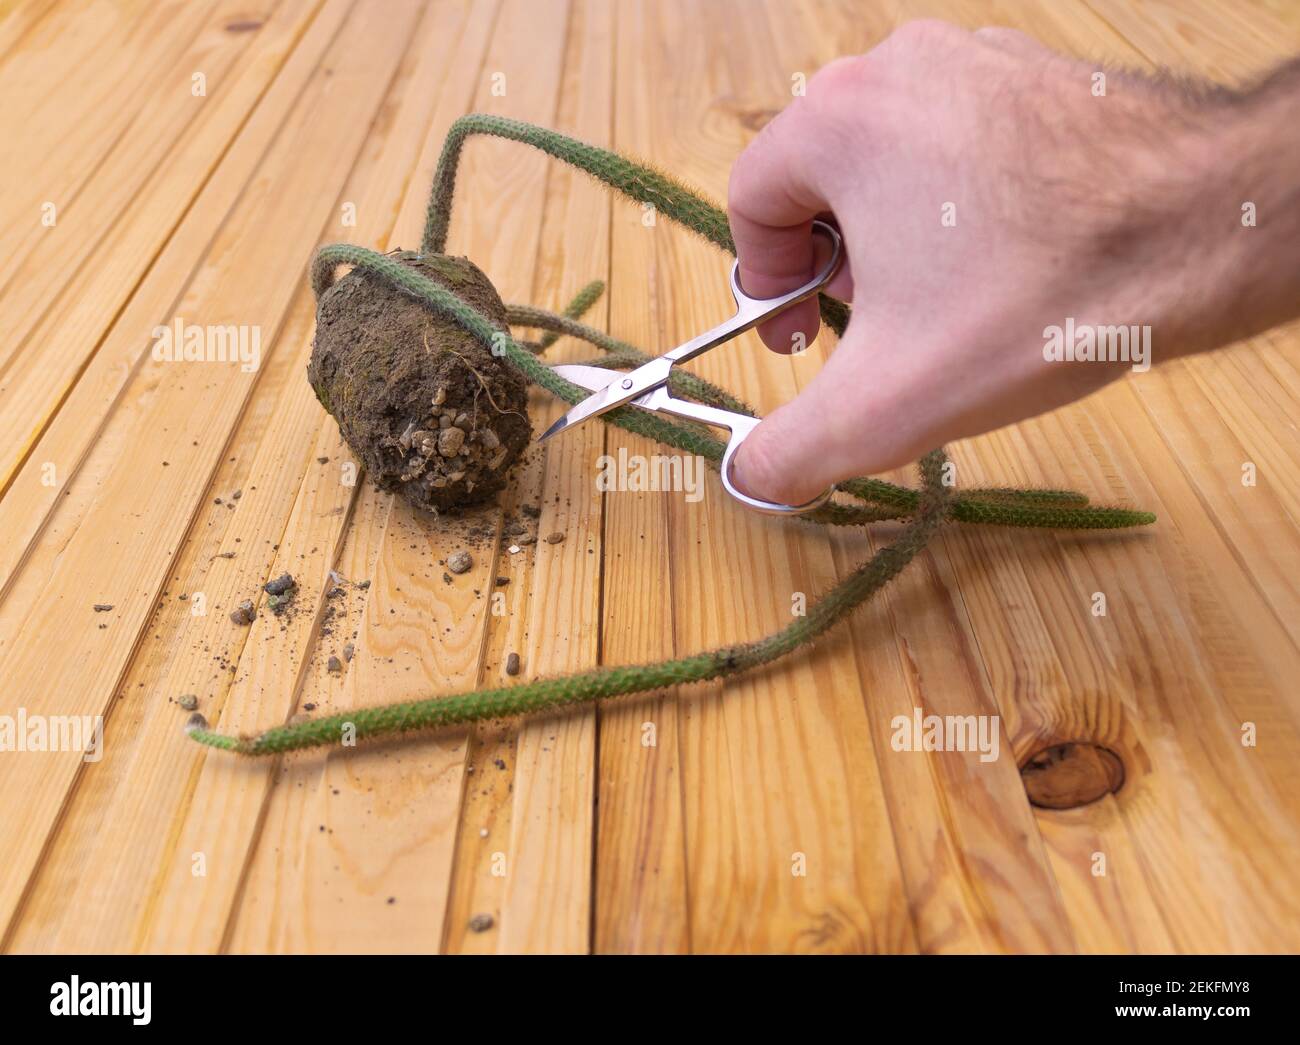 Concept of pruning Rattail Cactus - cutting the tail with scissors Stock Photo